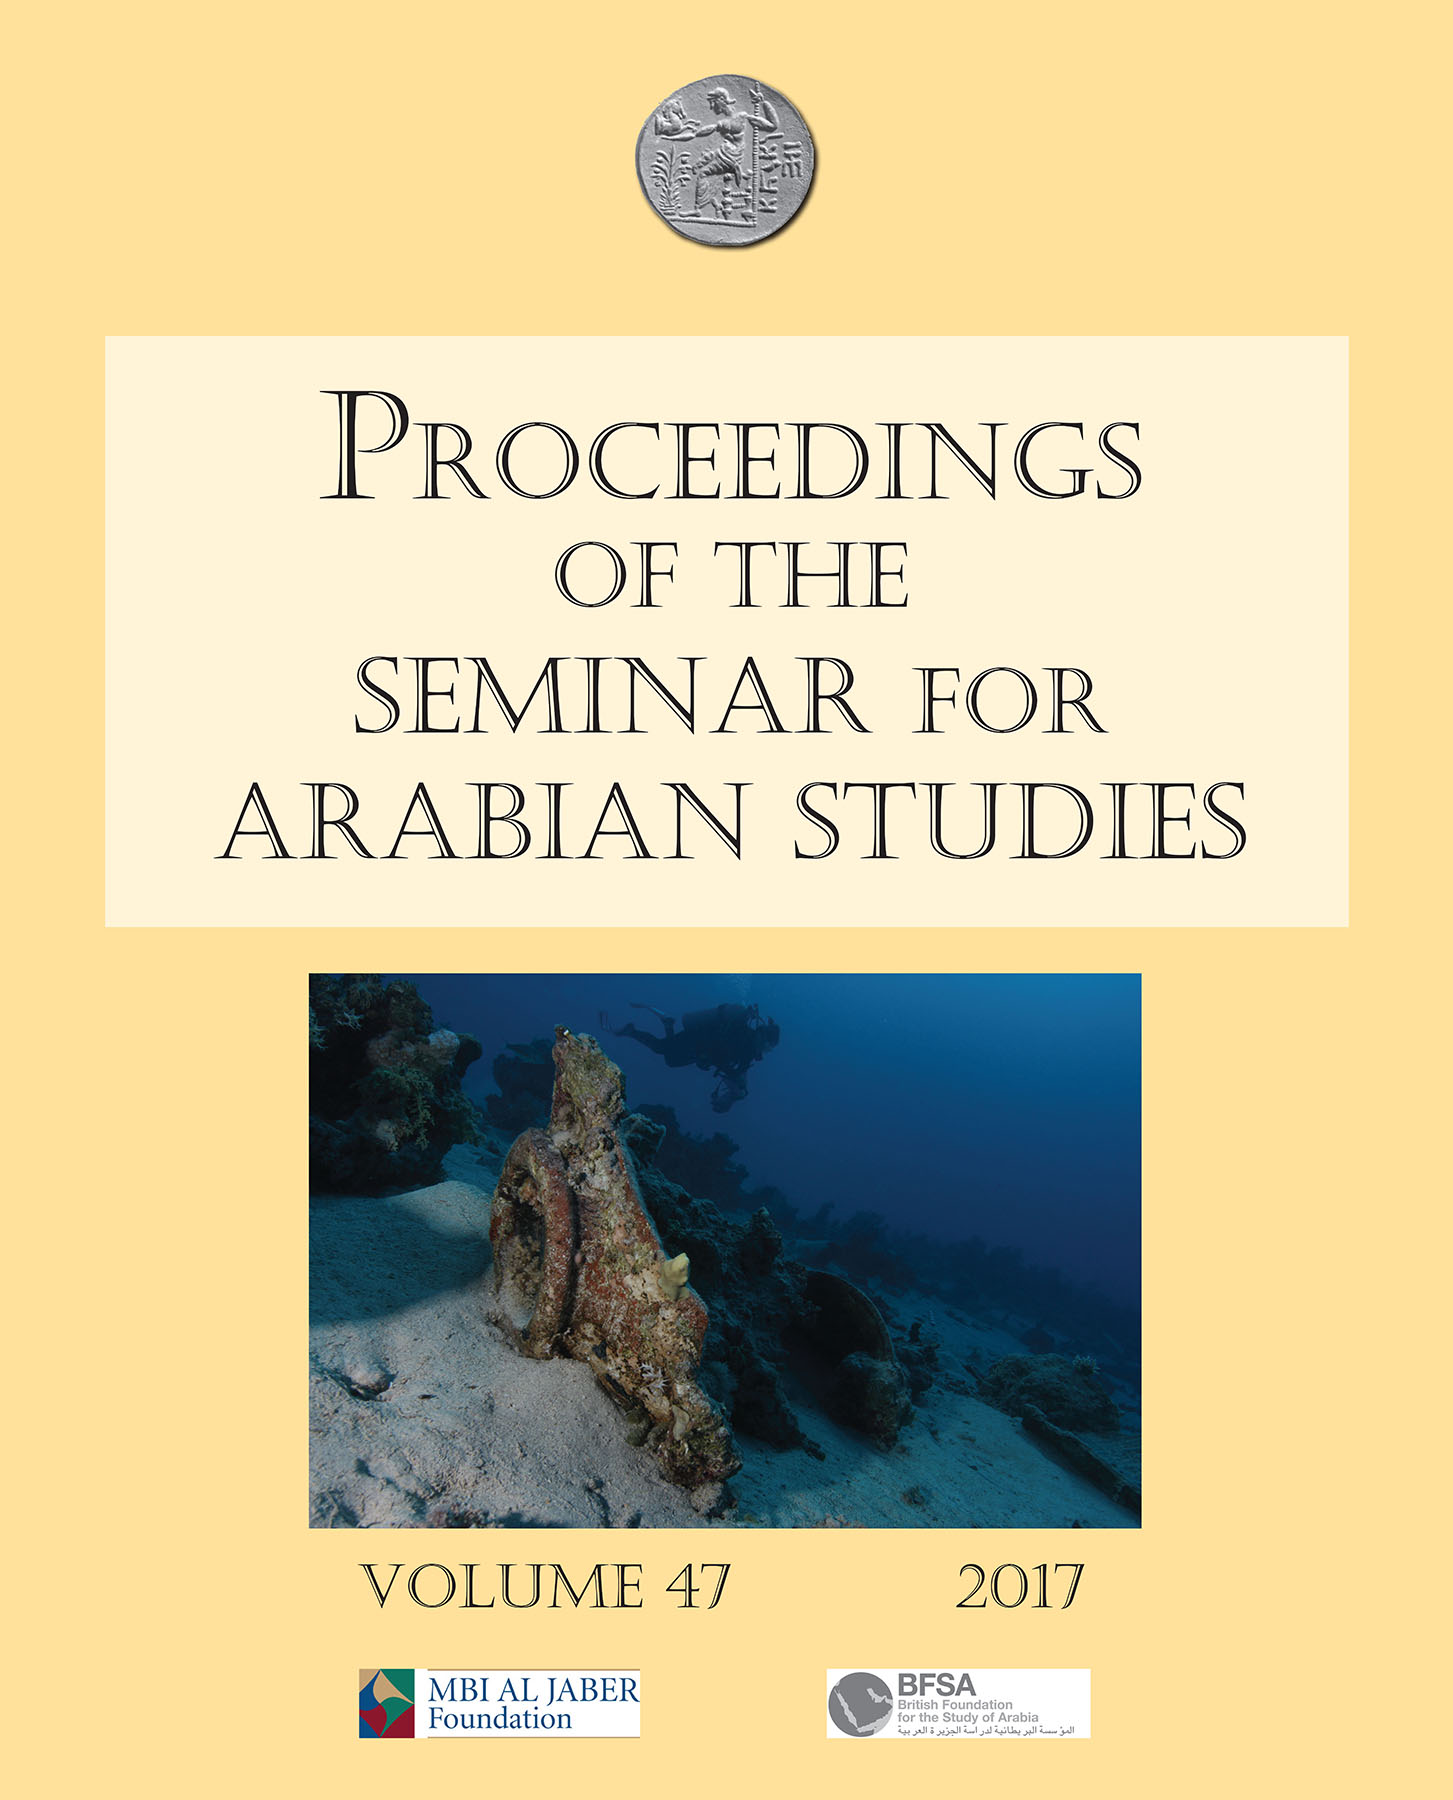 					View Vol. 47 (2017): Proceedings of the Seminar for Arabian Studies Volume 47 2017: Papers from the fiftieth meeting of the Seminar for Arabian Studies held at the British Museum, London, 29 to 31 July 2016
				